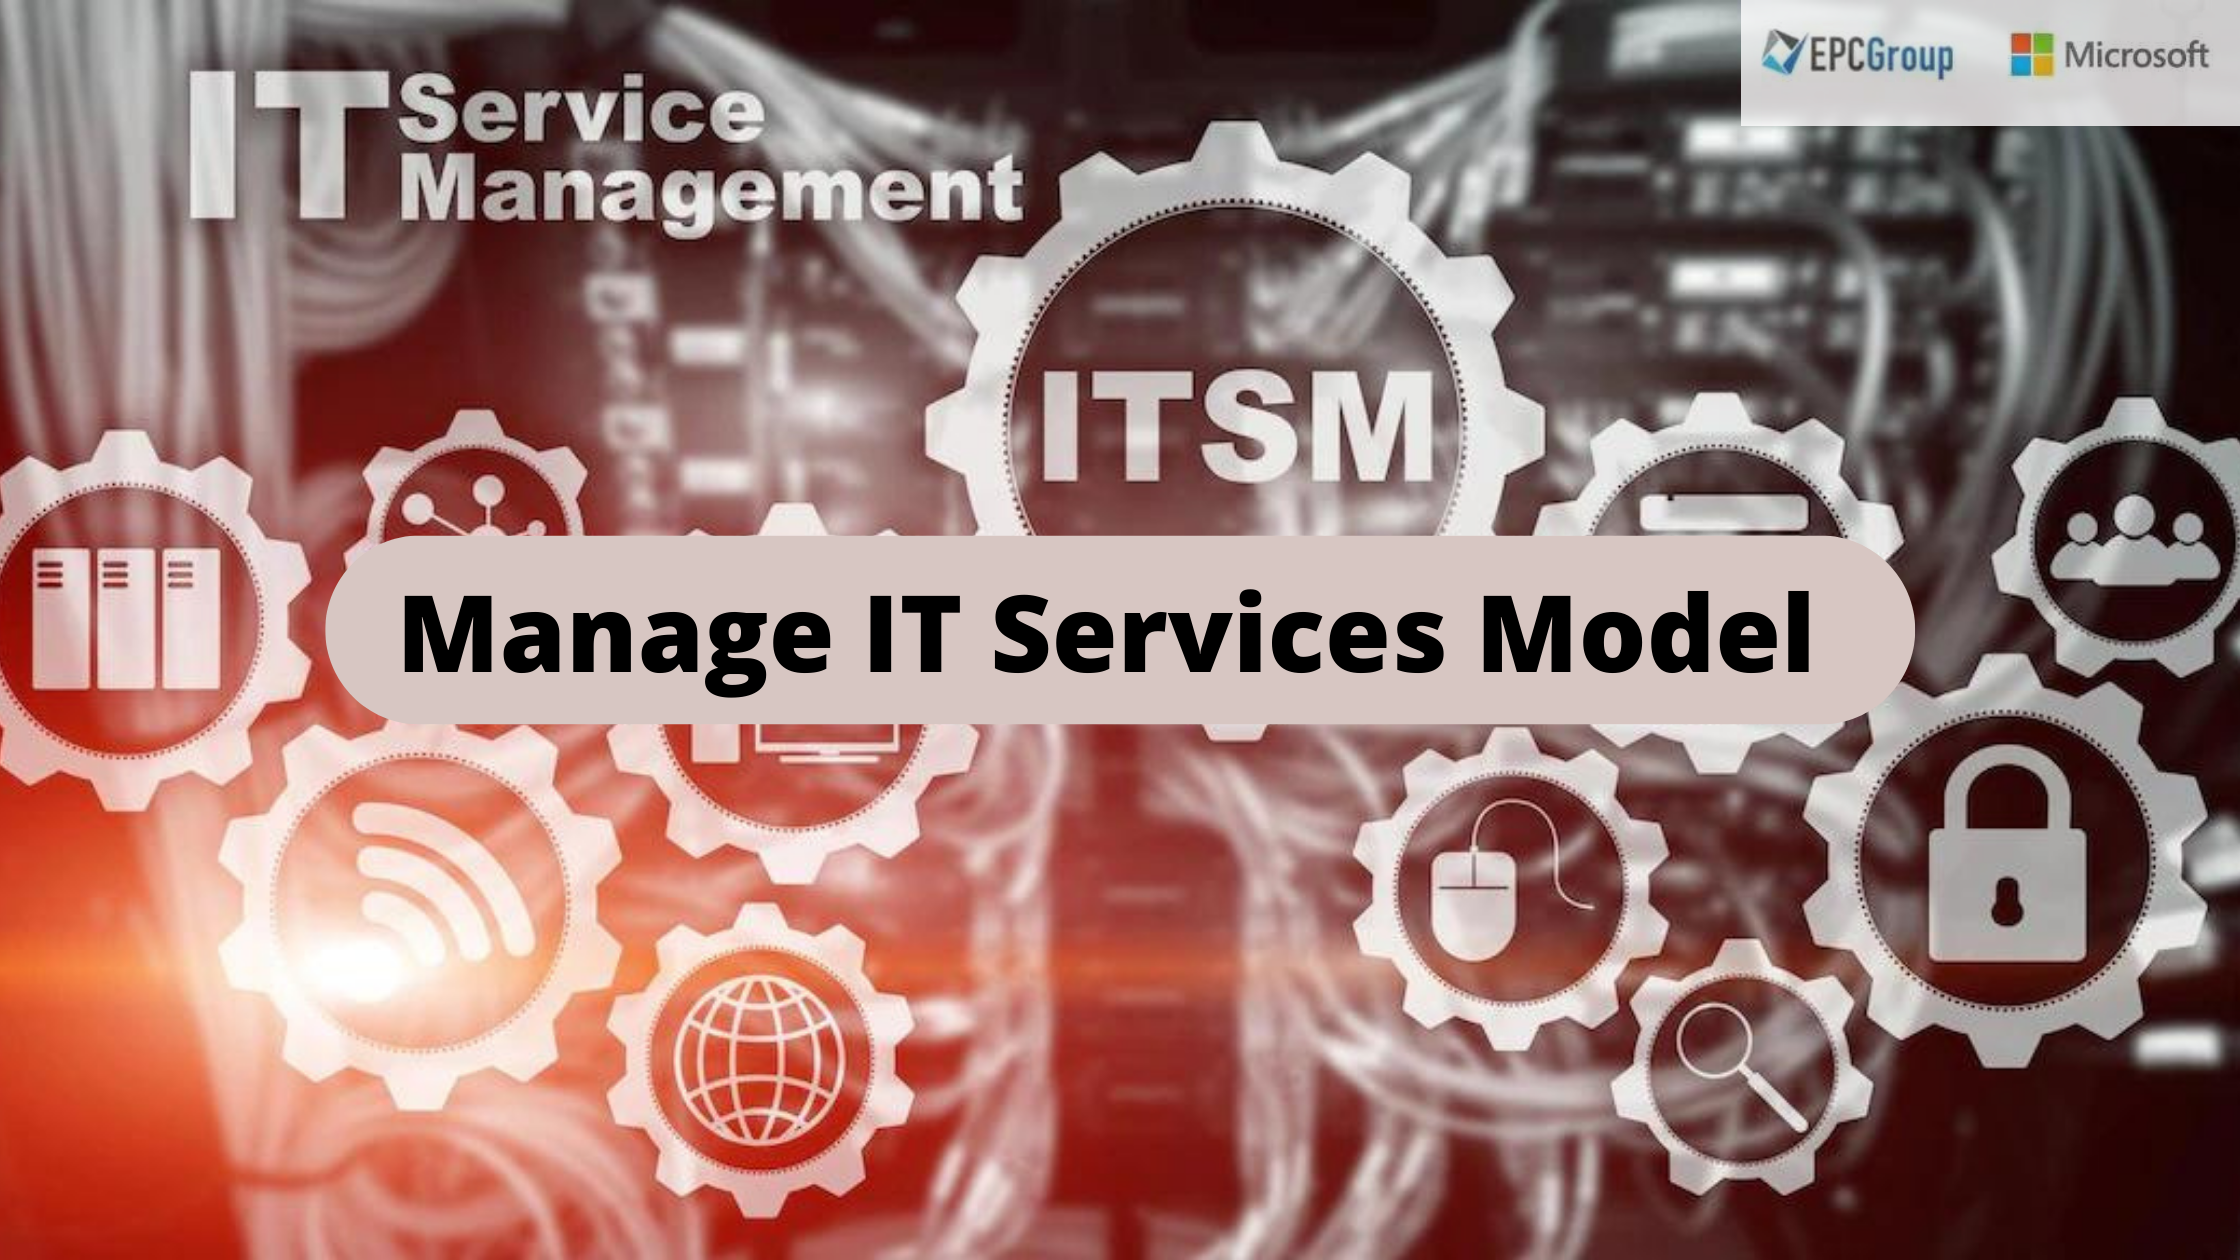 Manage IT Services Model (A Simple And Workable Model For Managing Your IT Services)